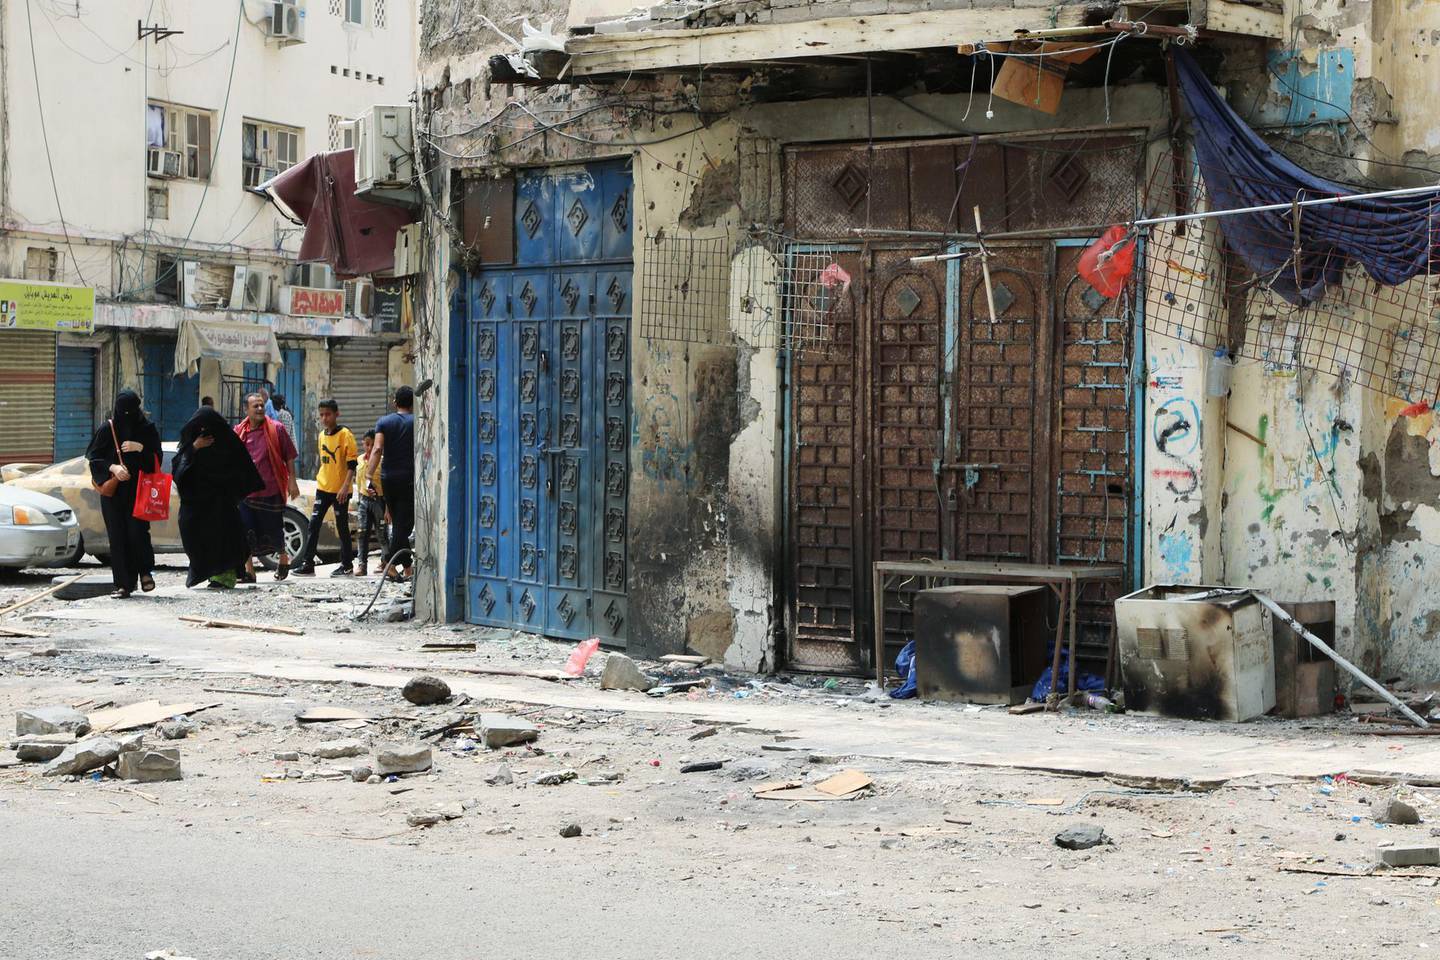 Yemeni people walk past shops damaged during clashes between separatists and government forces in Aden, Yemen August 13, 2019. REUTERS/Fawaz Salman